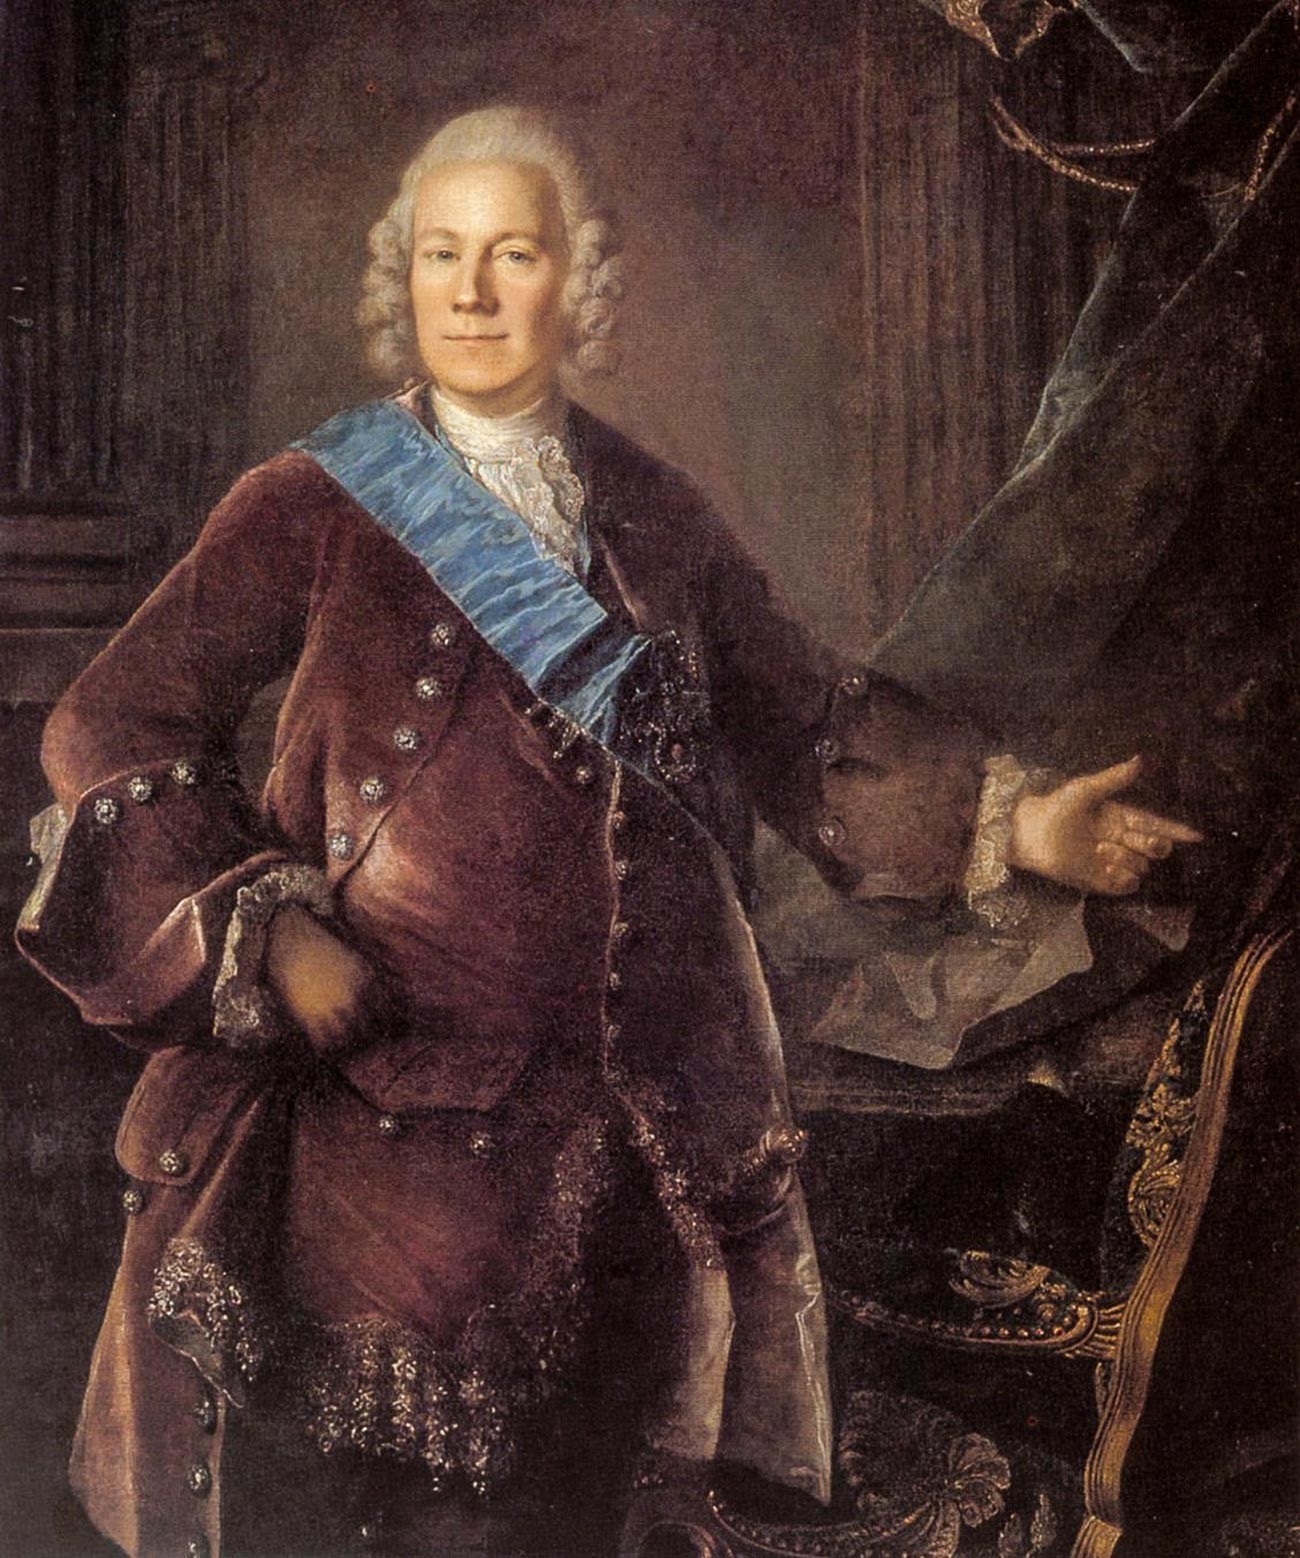 One of the most respected diplomats of the 18th century, Count Aleksey Bestuzhev-Ryumin.